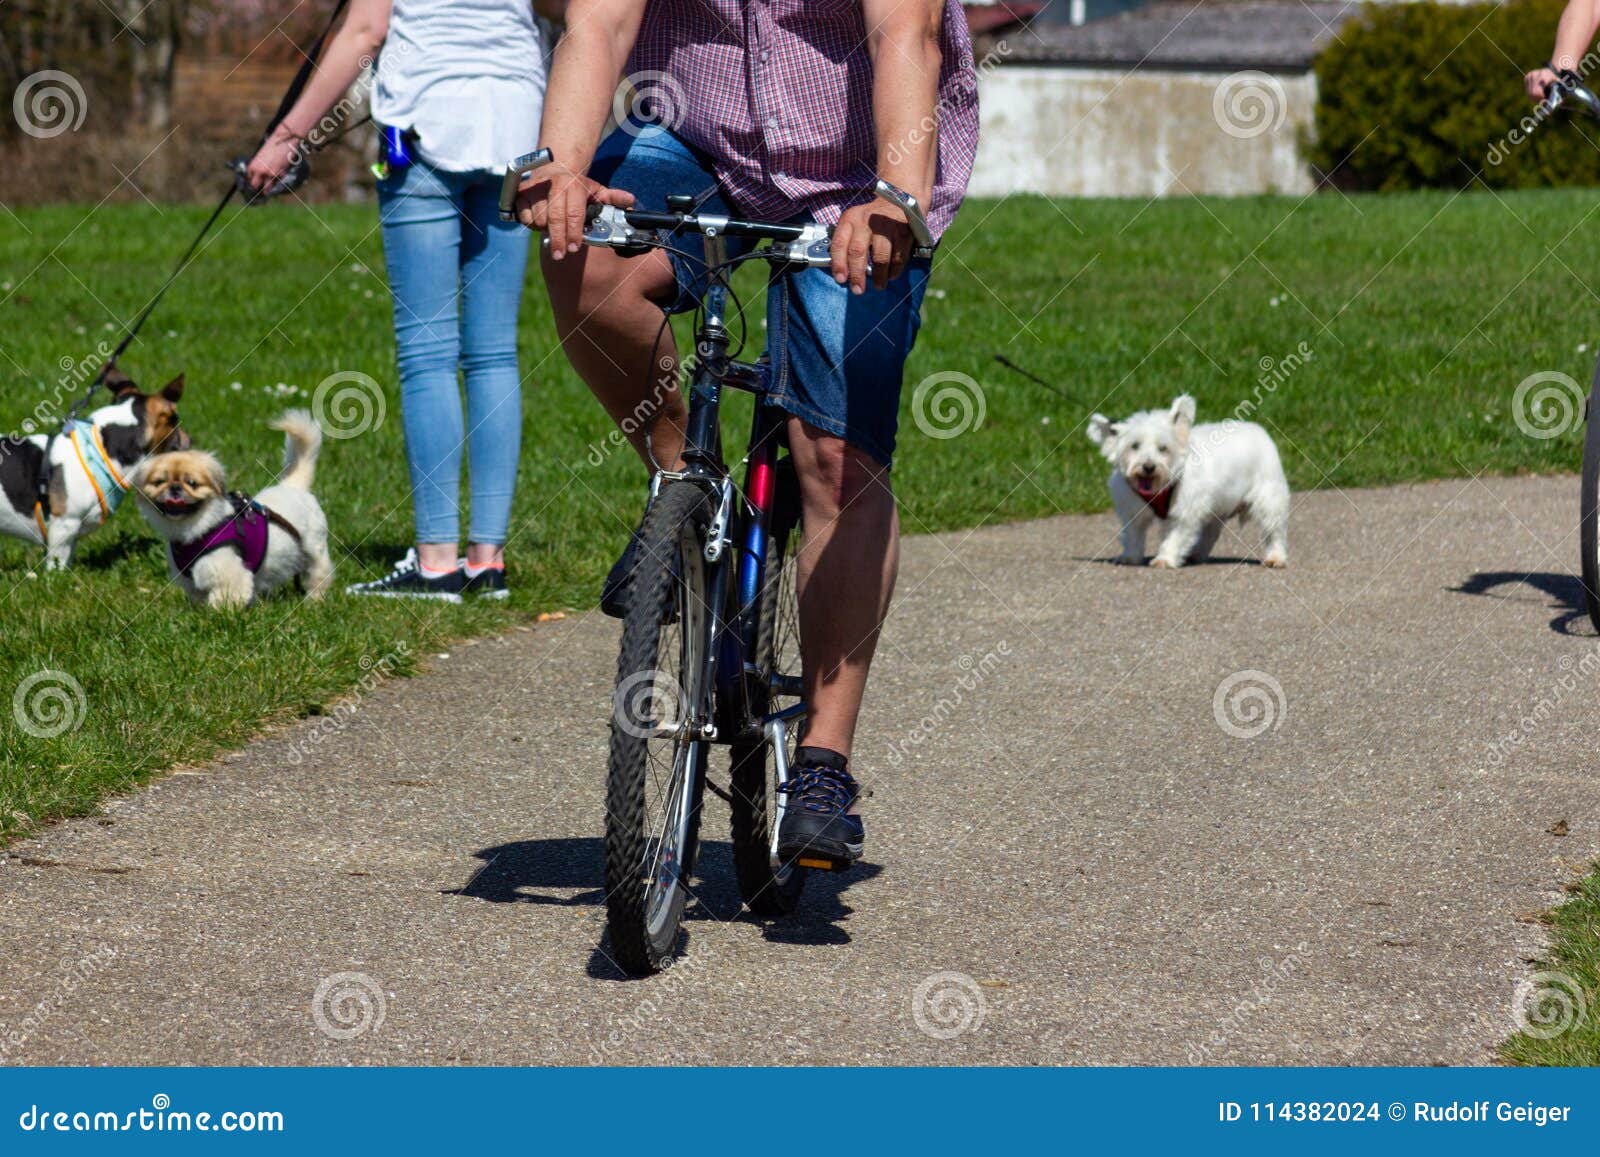 Cycling outdoor stock photo. Image of bike, bicycle - 114382024